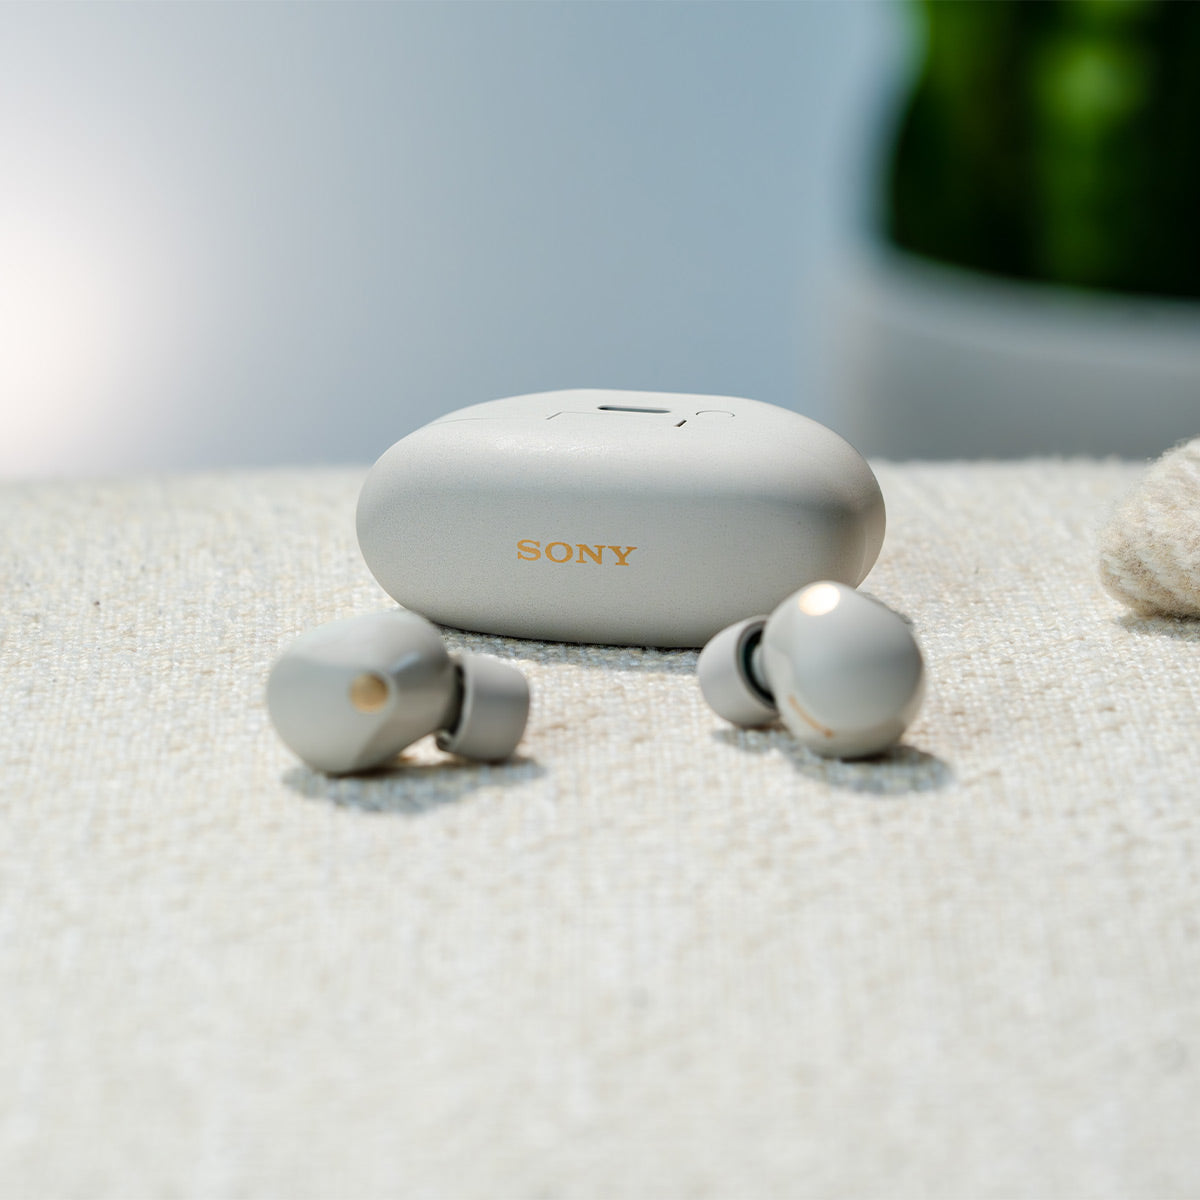 Sony WF-1000XM5 The Best Truly Wireless Bluetooth Noise Canceling Earbuds  Headphones with Alexa Built in, Silver- New Model